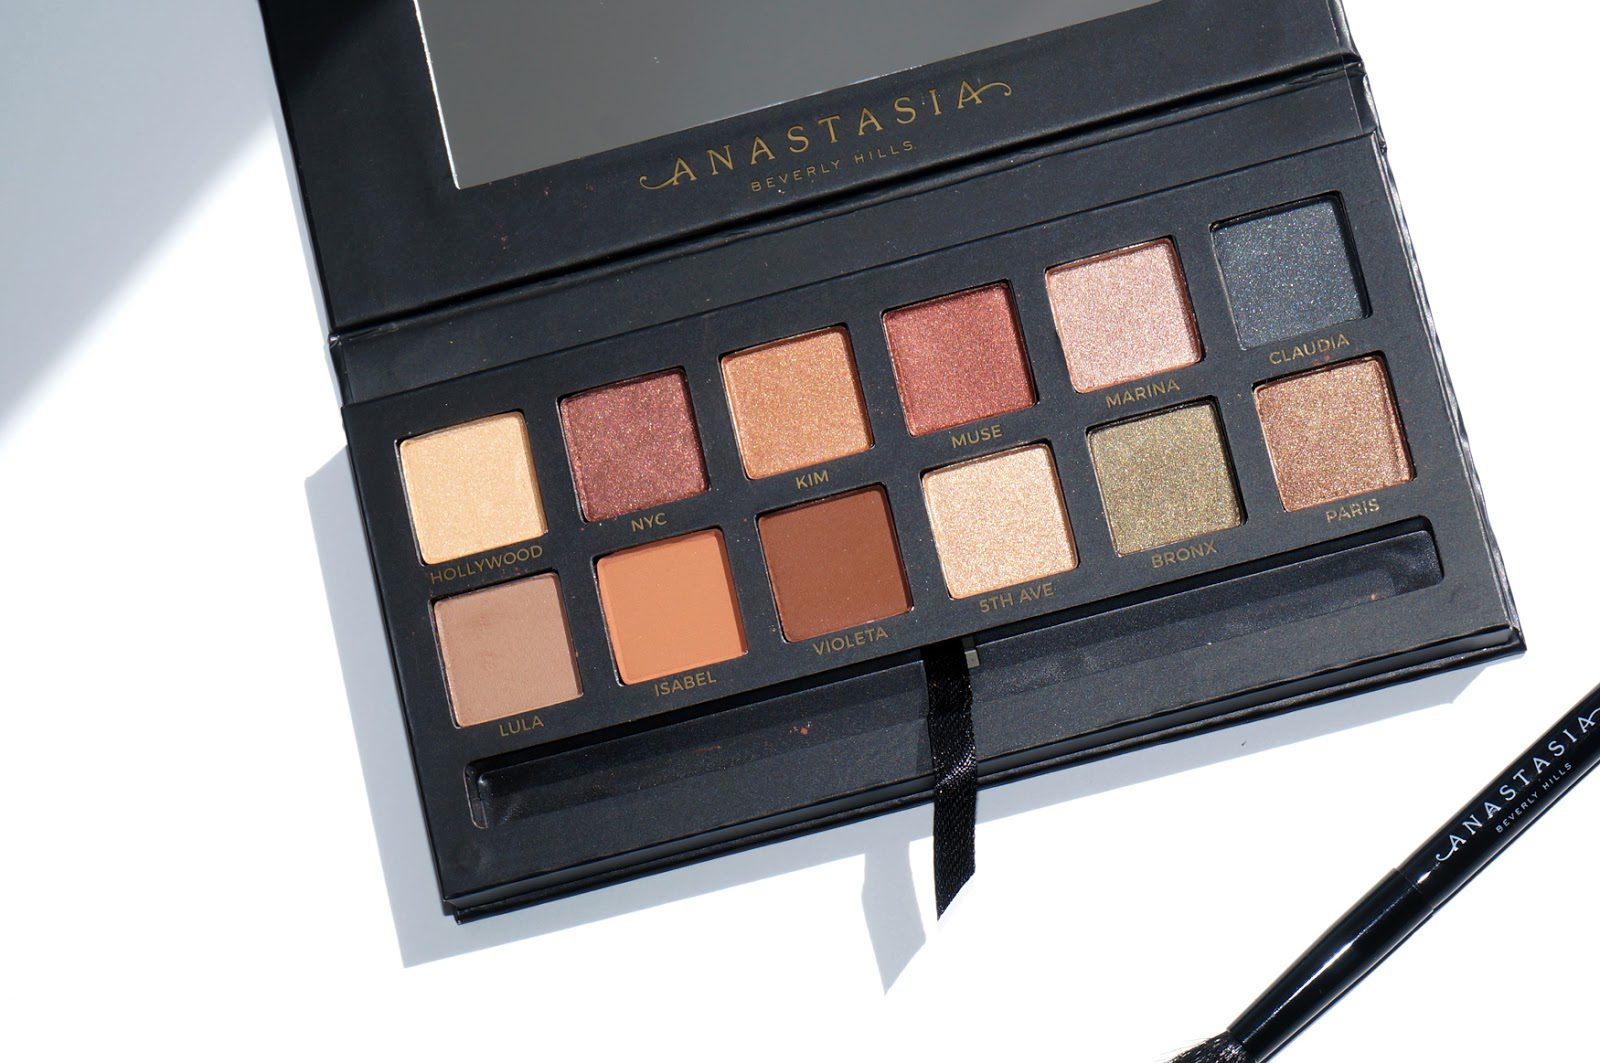 The Beauty Look Book - Anastasia Beverly Hills Master Palette by Mario review